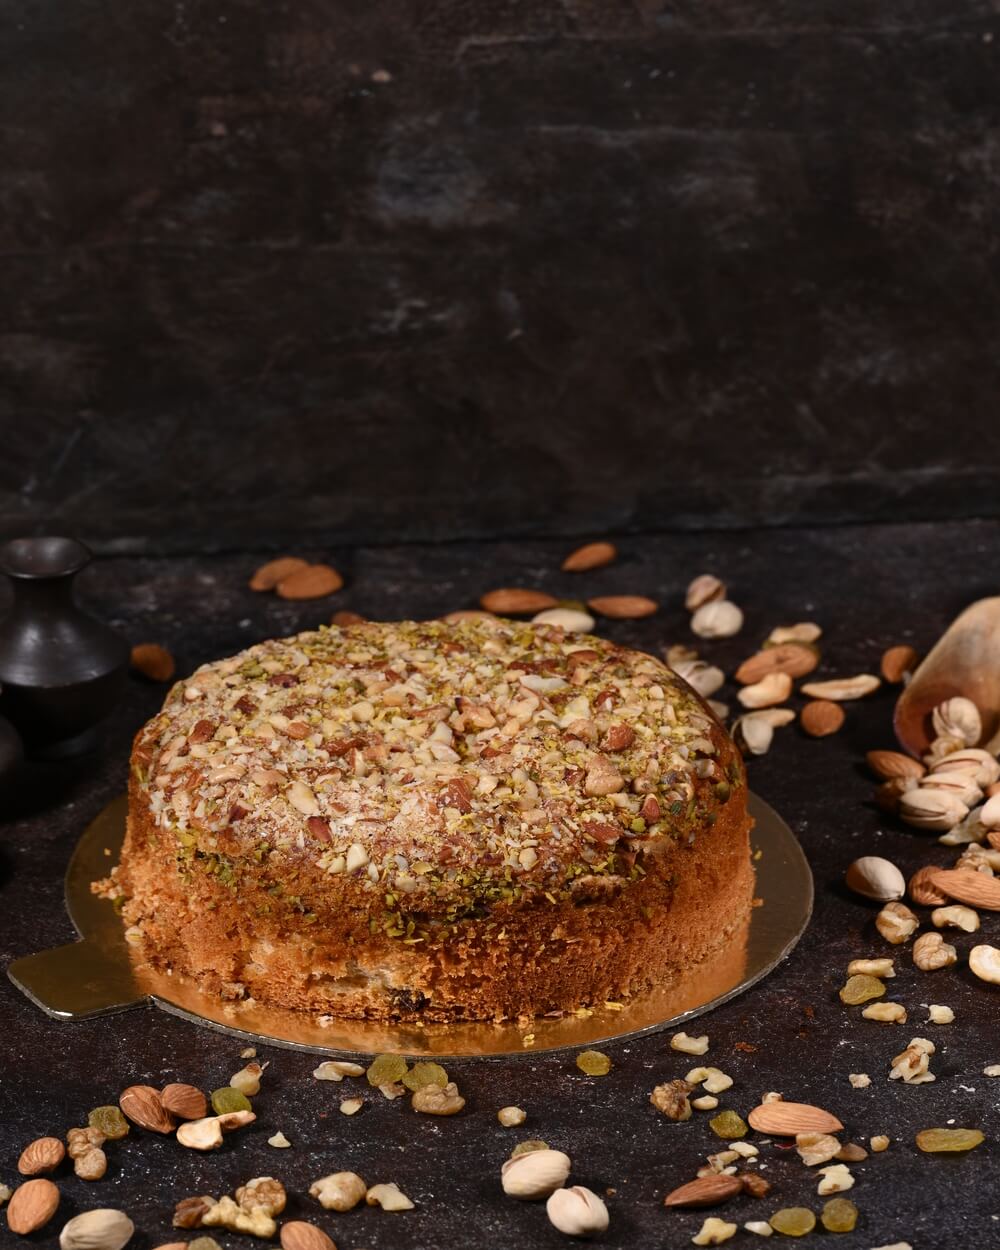 Shop for Fresh Dry Fruit Covering Chocolate Cake online - Partapgarh